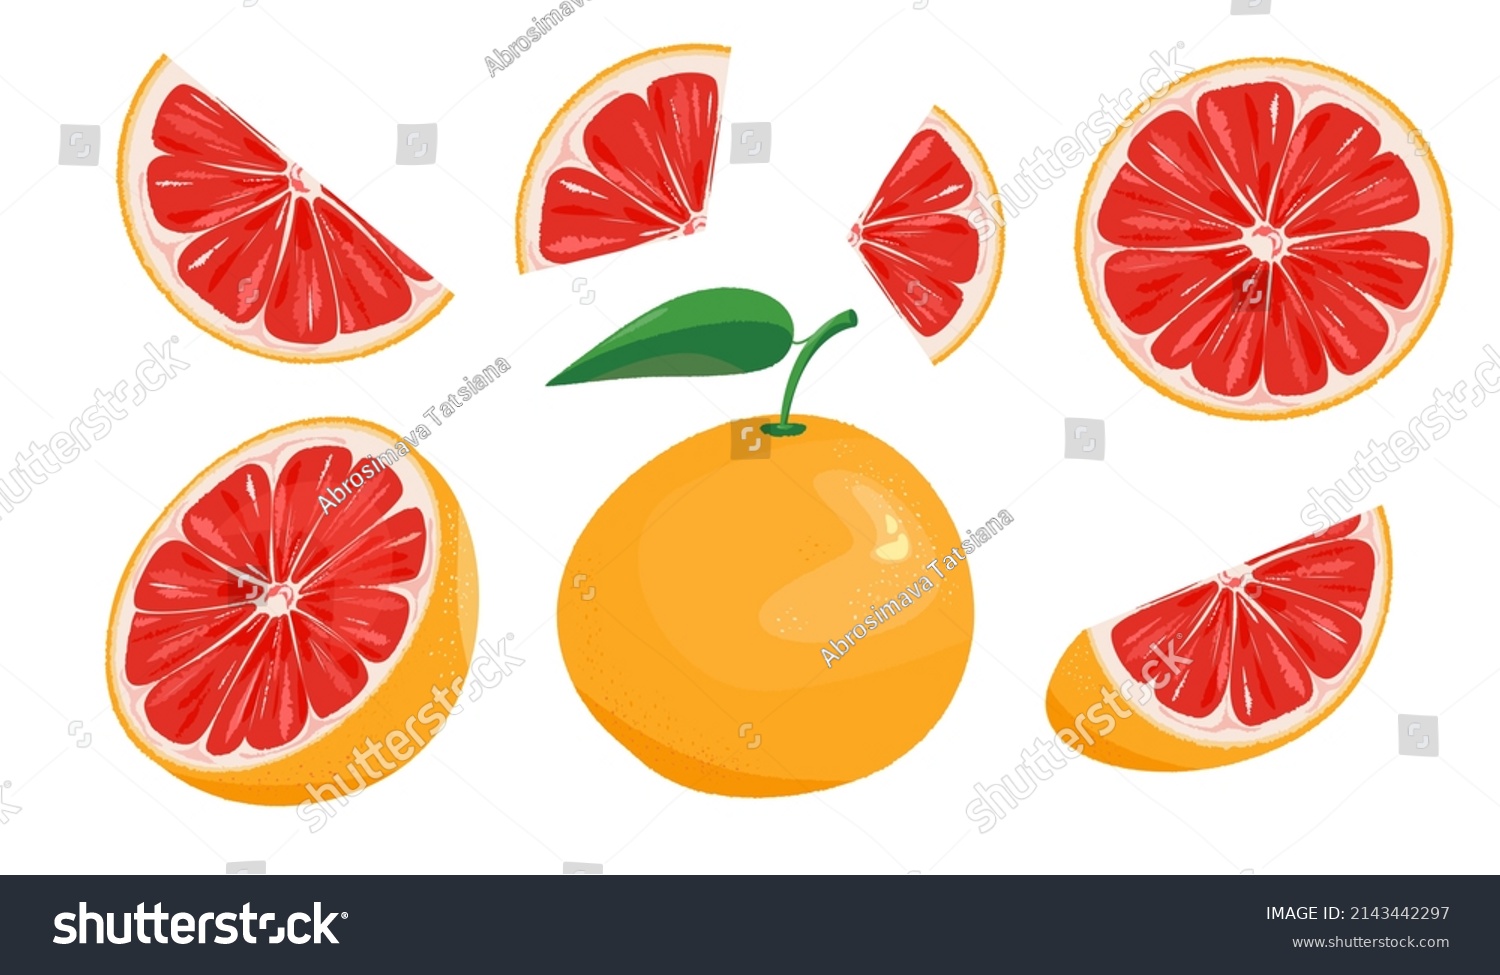 Grapefruit collection.A set of grapefruit icons, slices, grapefruit cut in half, circles.Vector illustration of grapefruit for advertising, social networks, websites. #2143442297